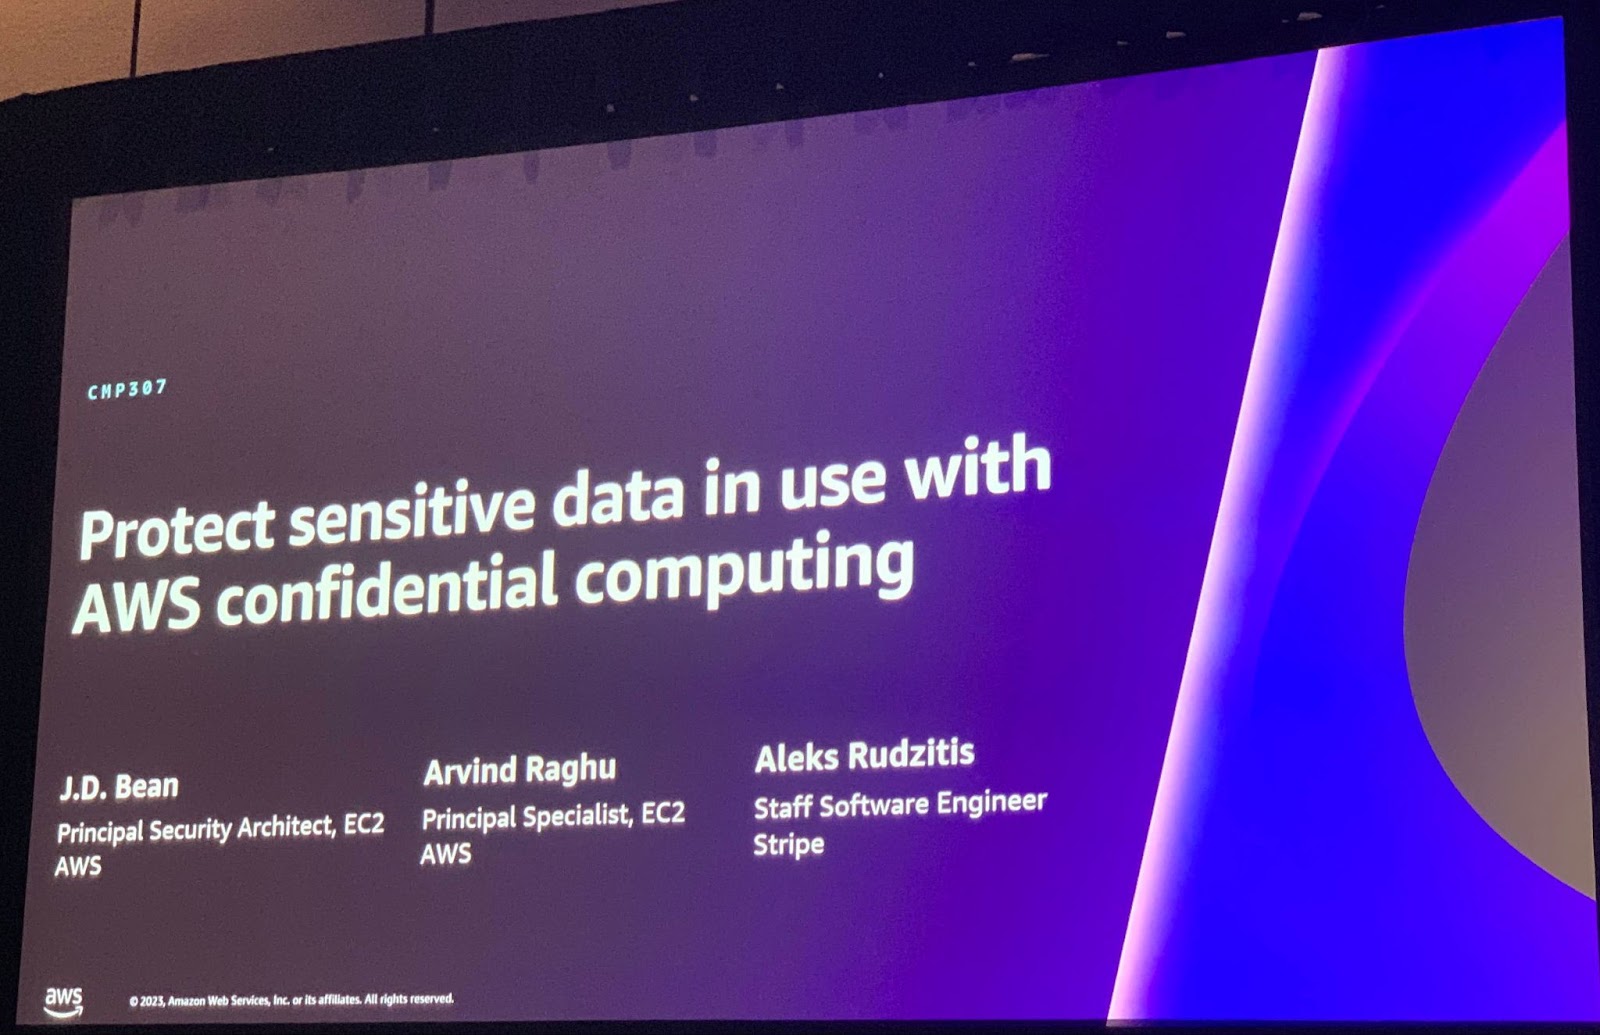 Protect sensitive data in use with AWS confidential computing